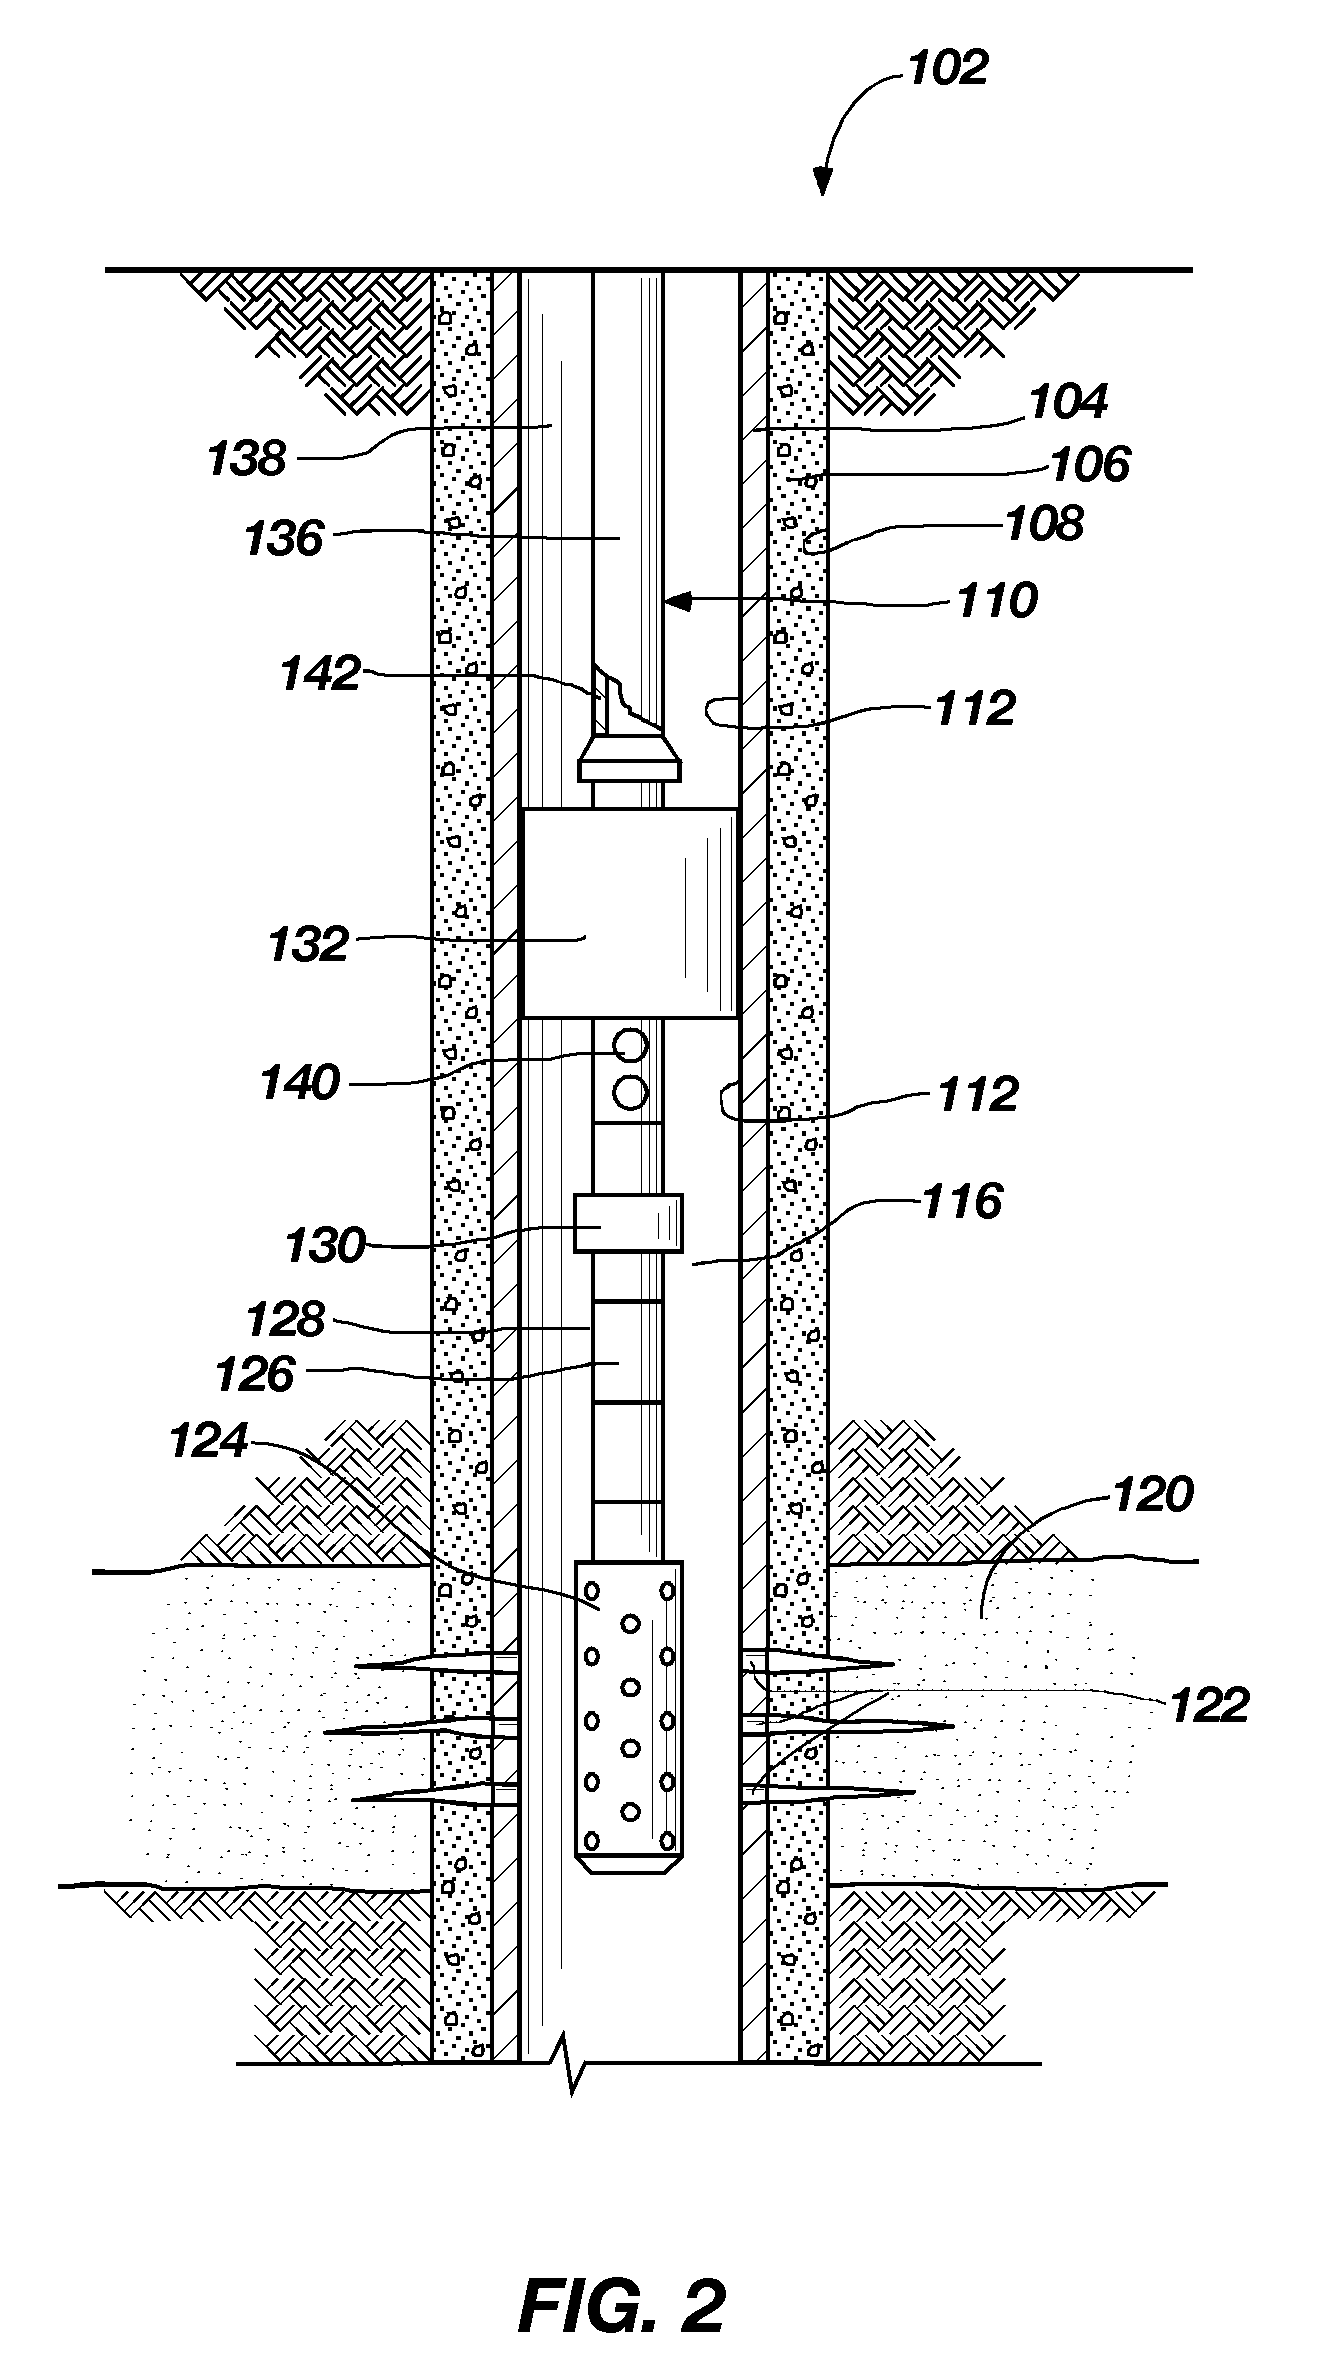 Methods and apparatuses for electronic time delay and systems including same